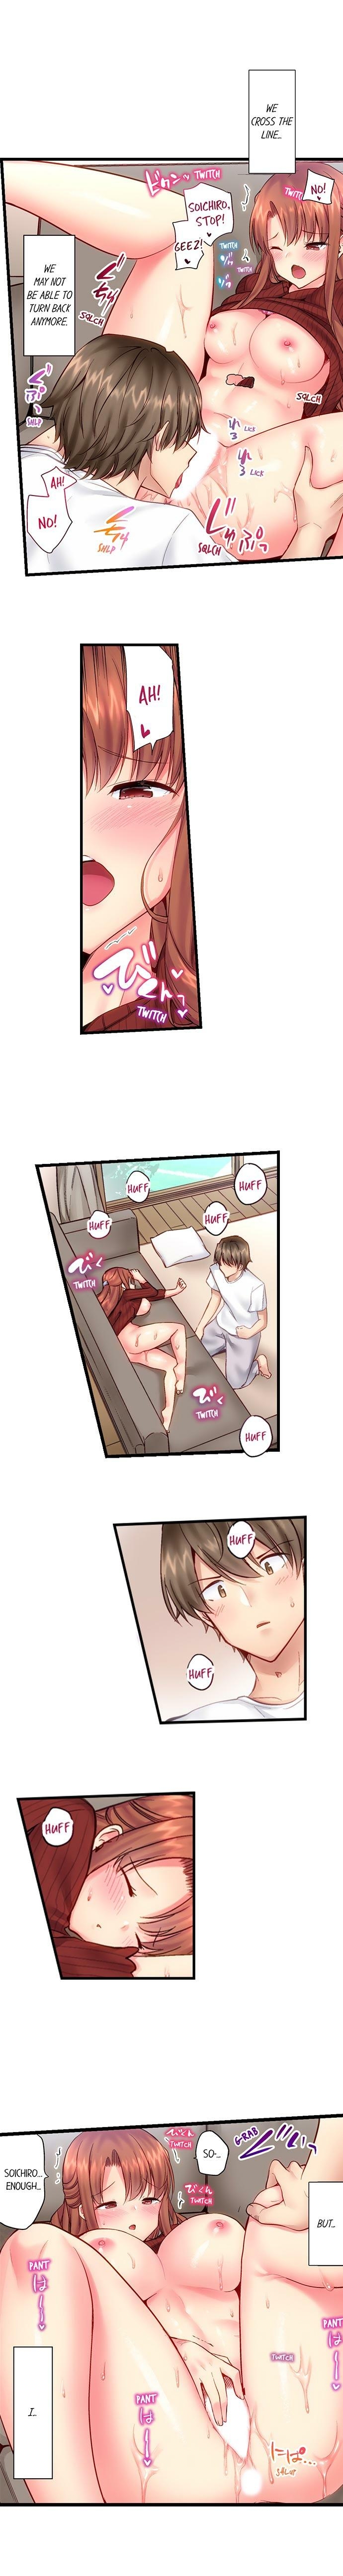 [Yuuki HB] "Hypnotized" Sex with My Brother Ch.21/? [English] [Ongoing] 49